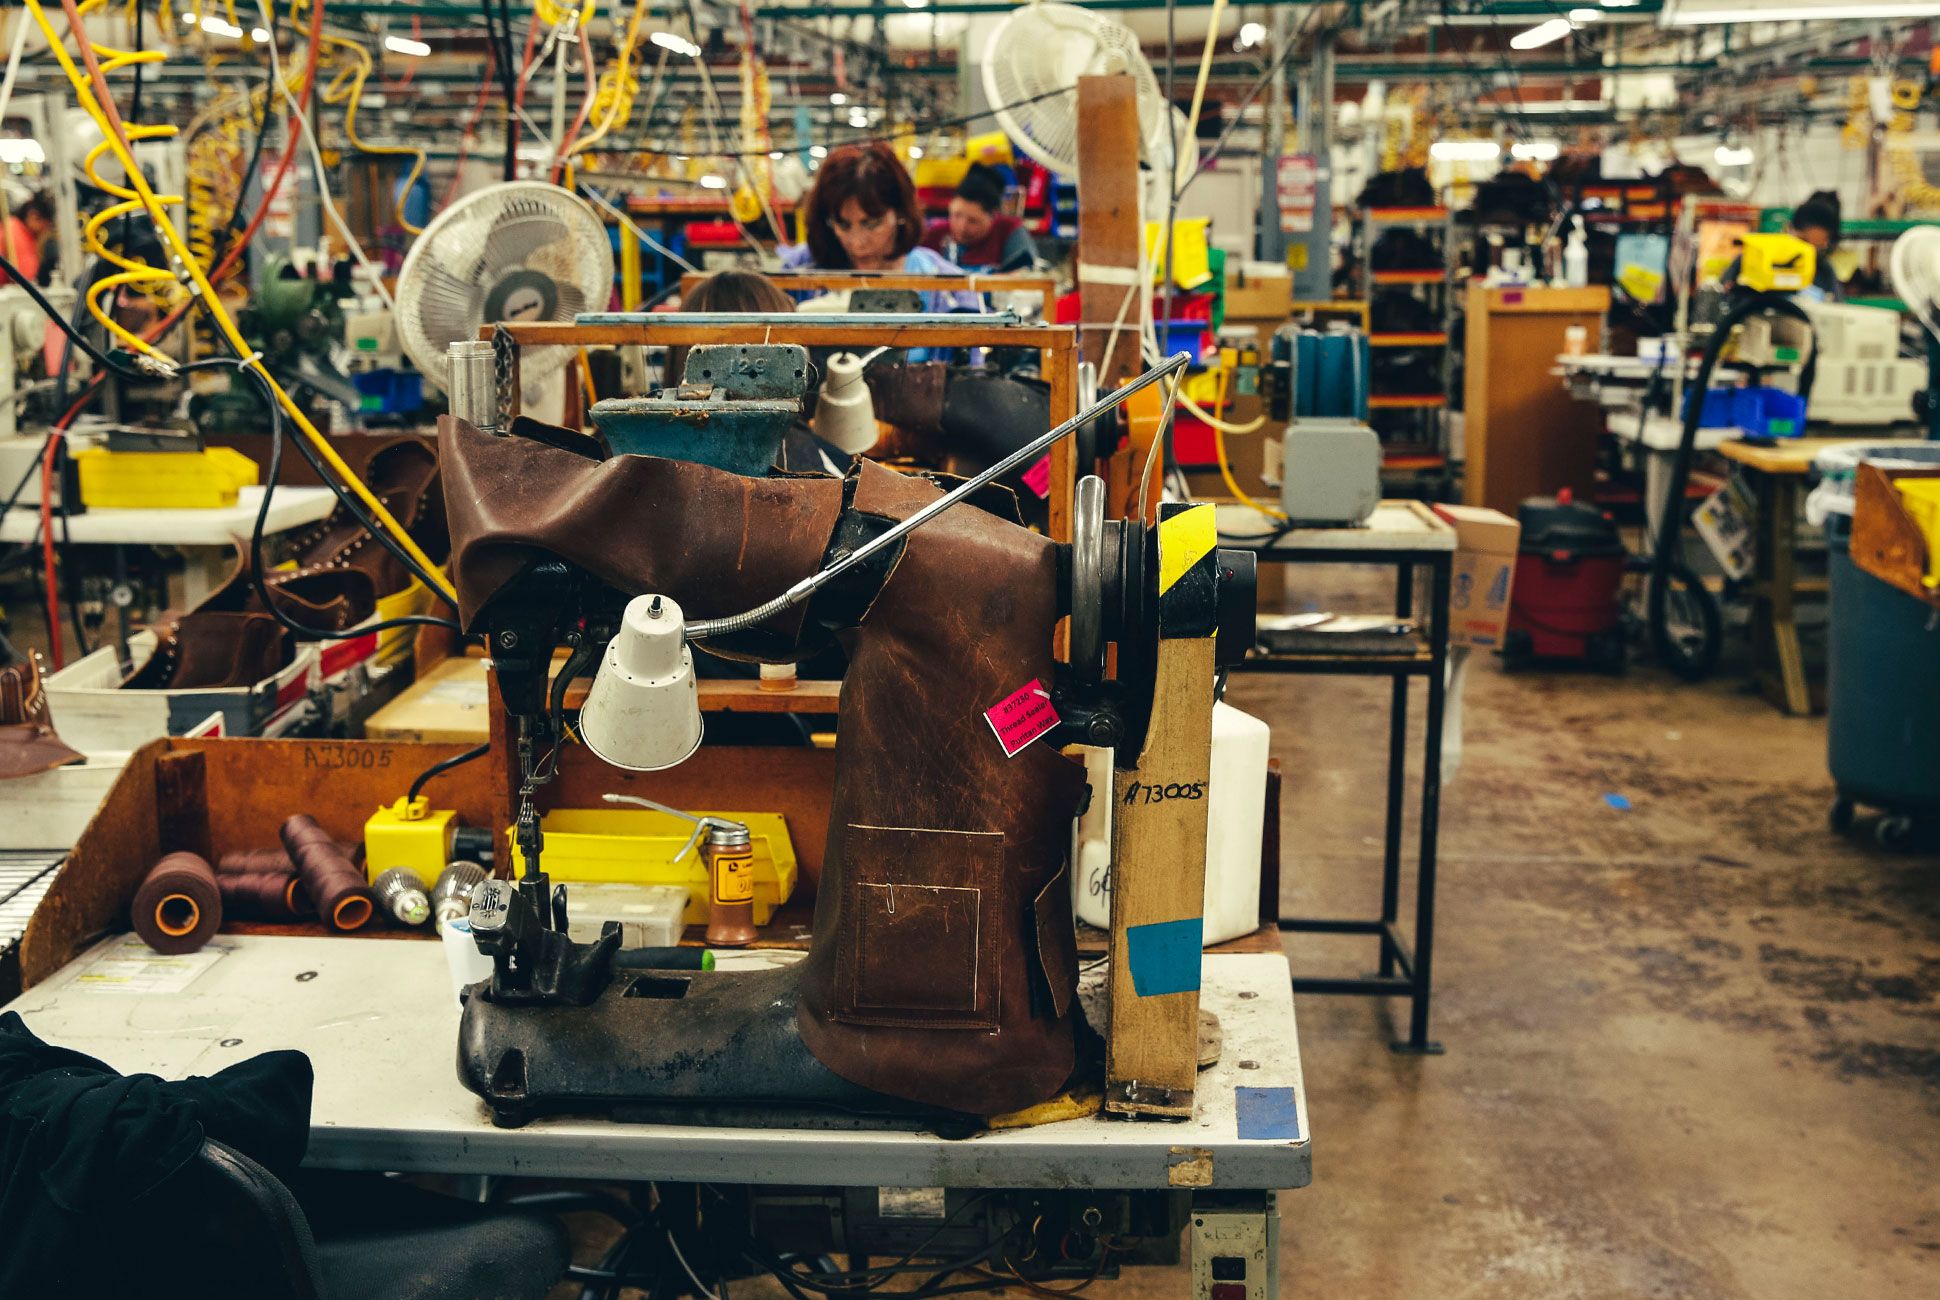 red wing factory